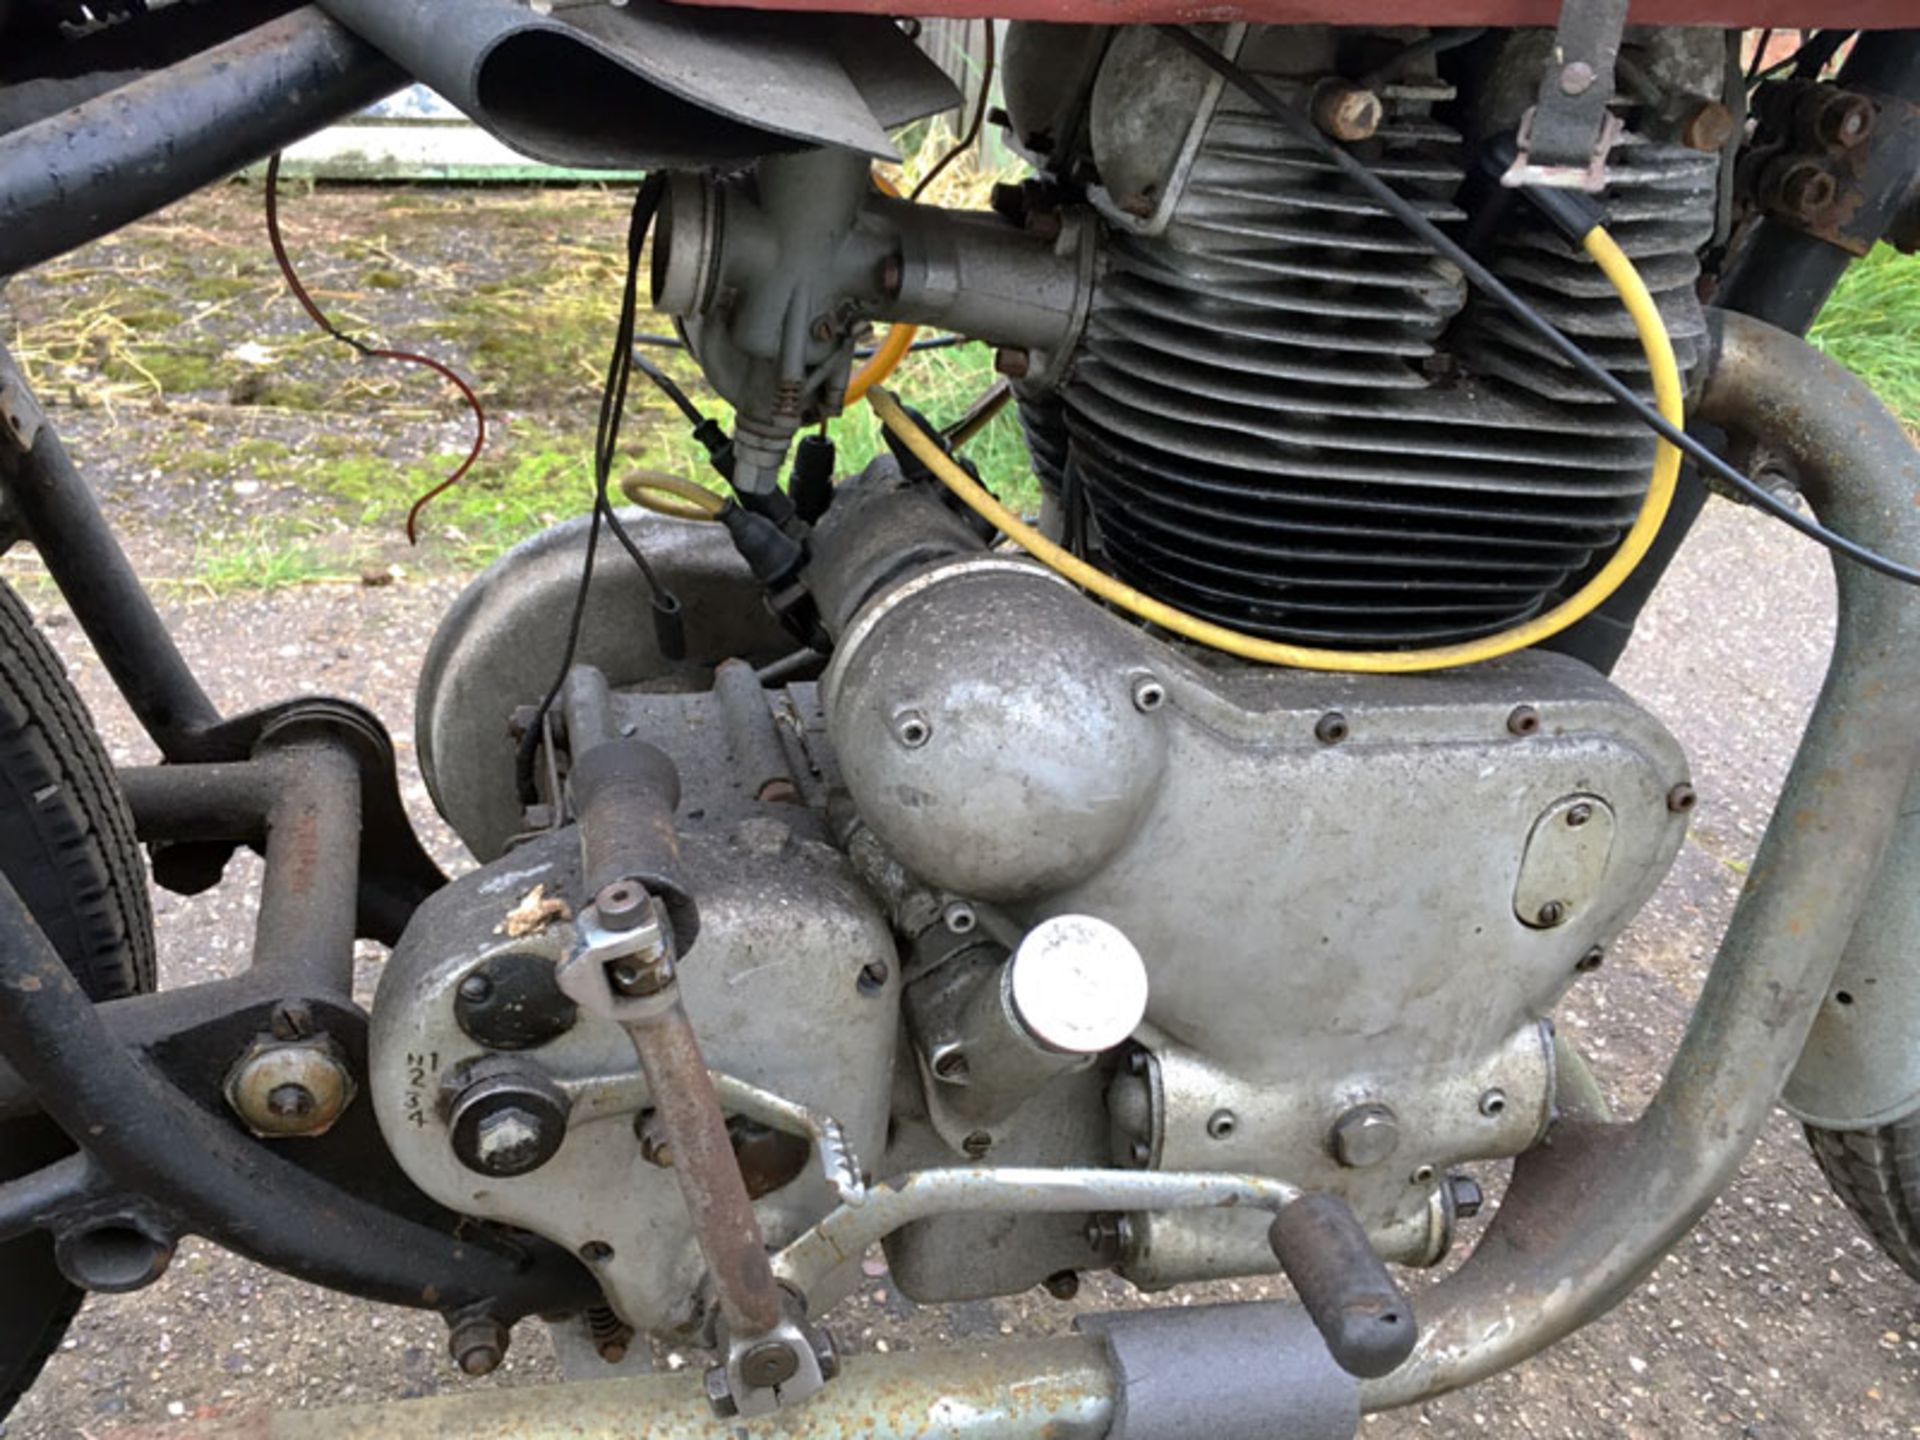 1960 Royal Enfield Constellation - Image 3 of 6